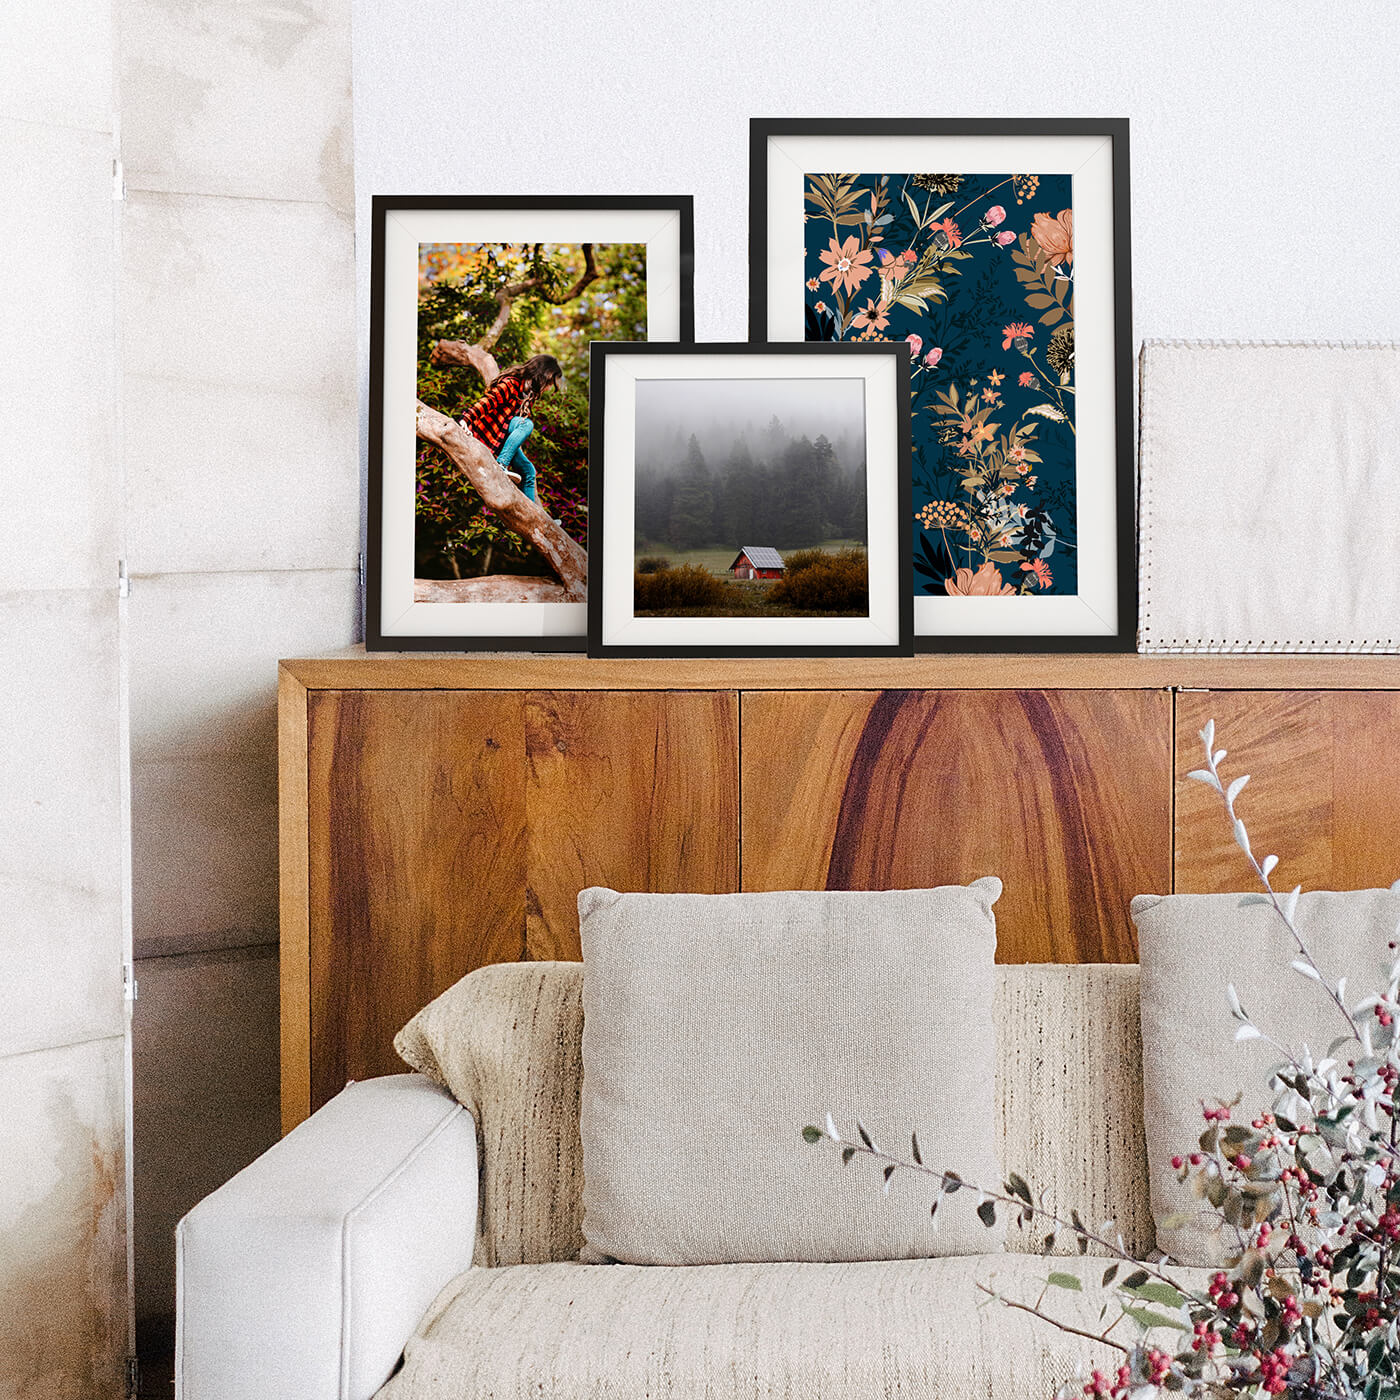 framed photos by printique on a buffet in front of couch